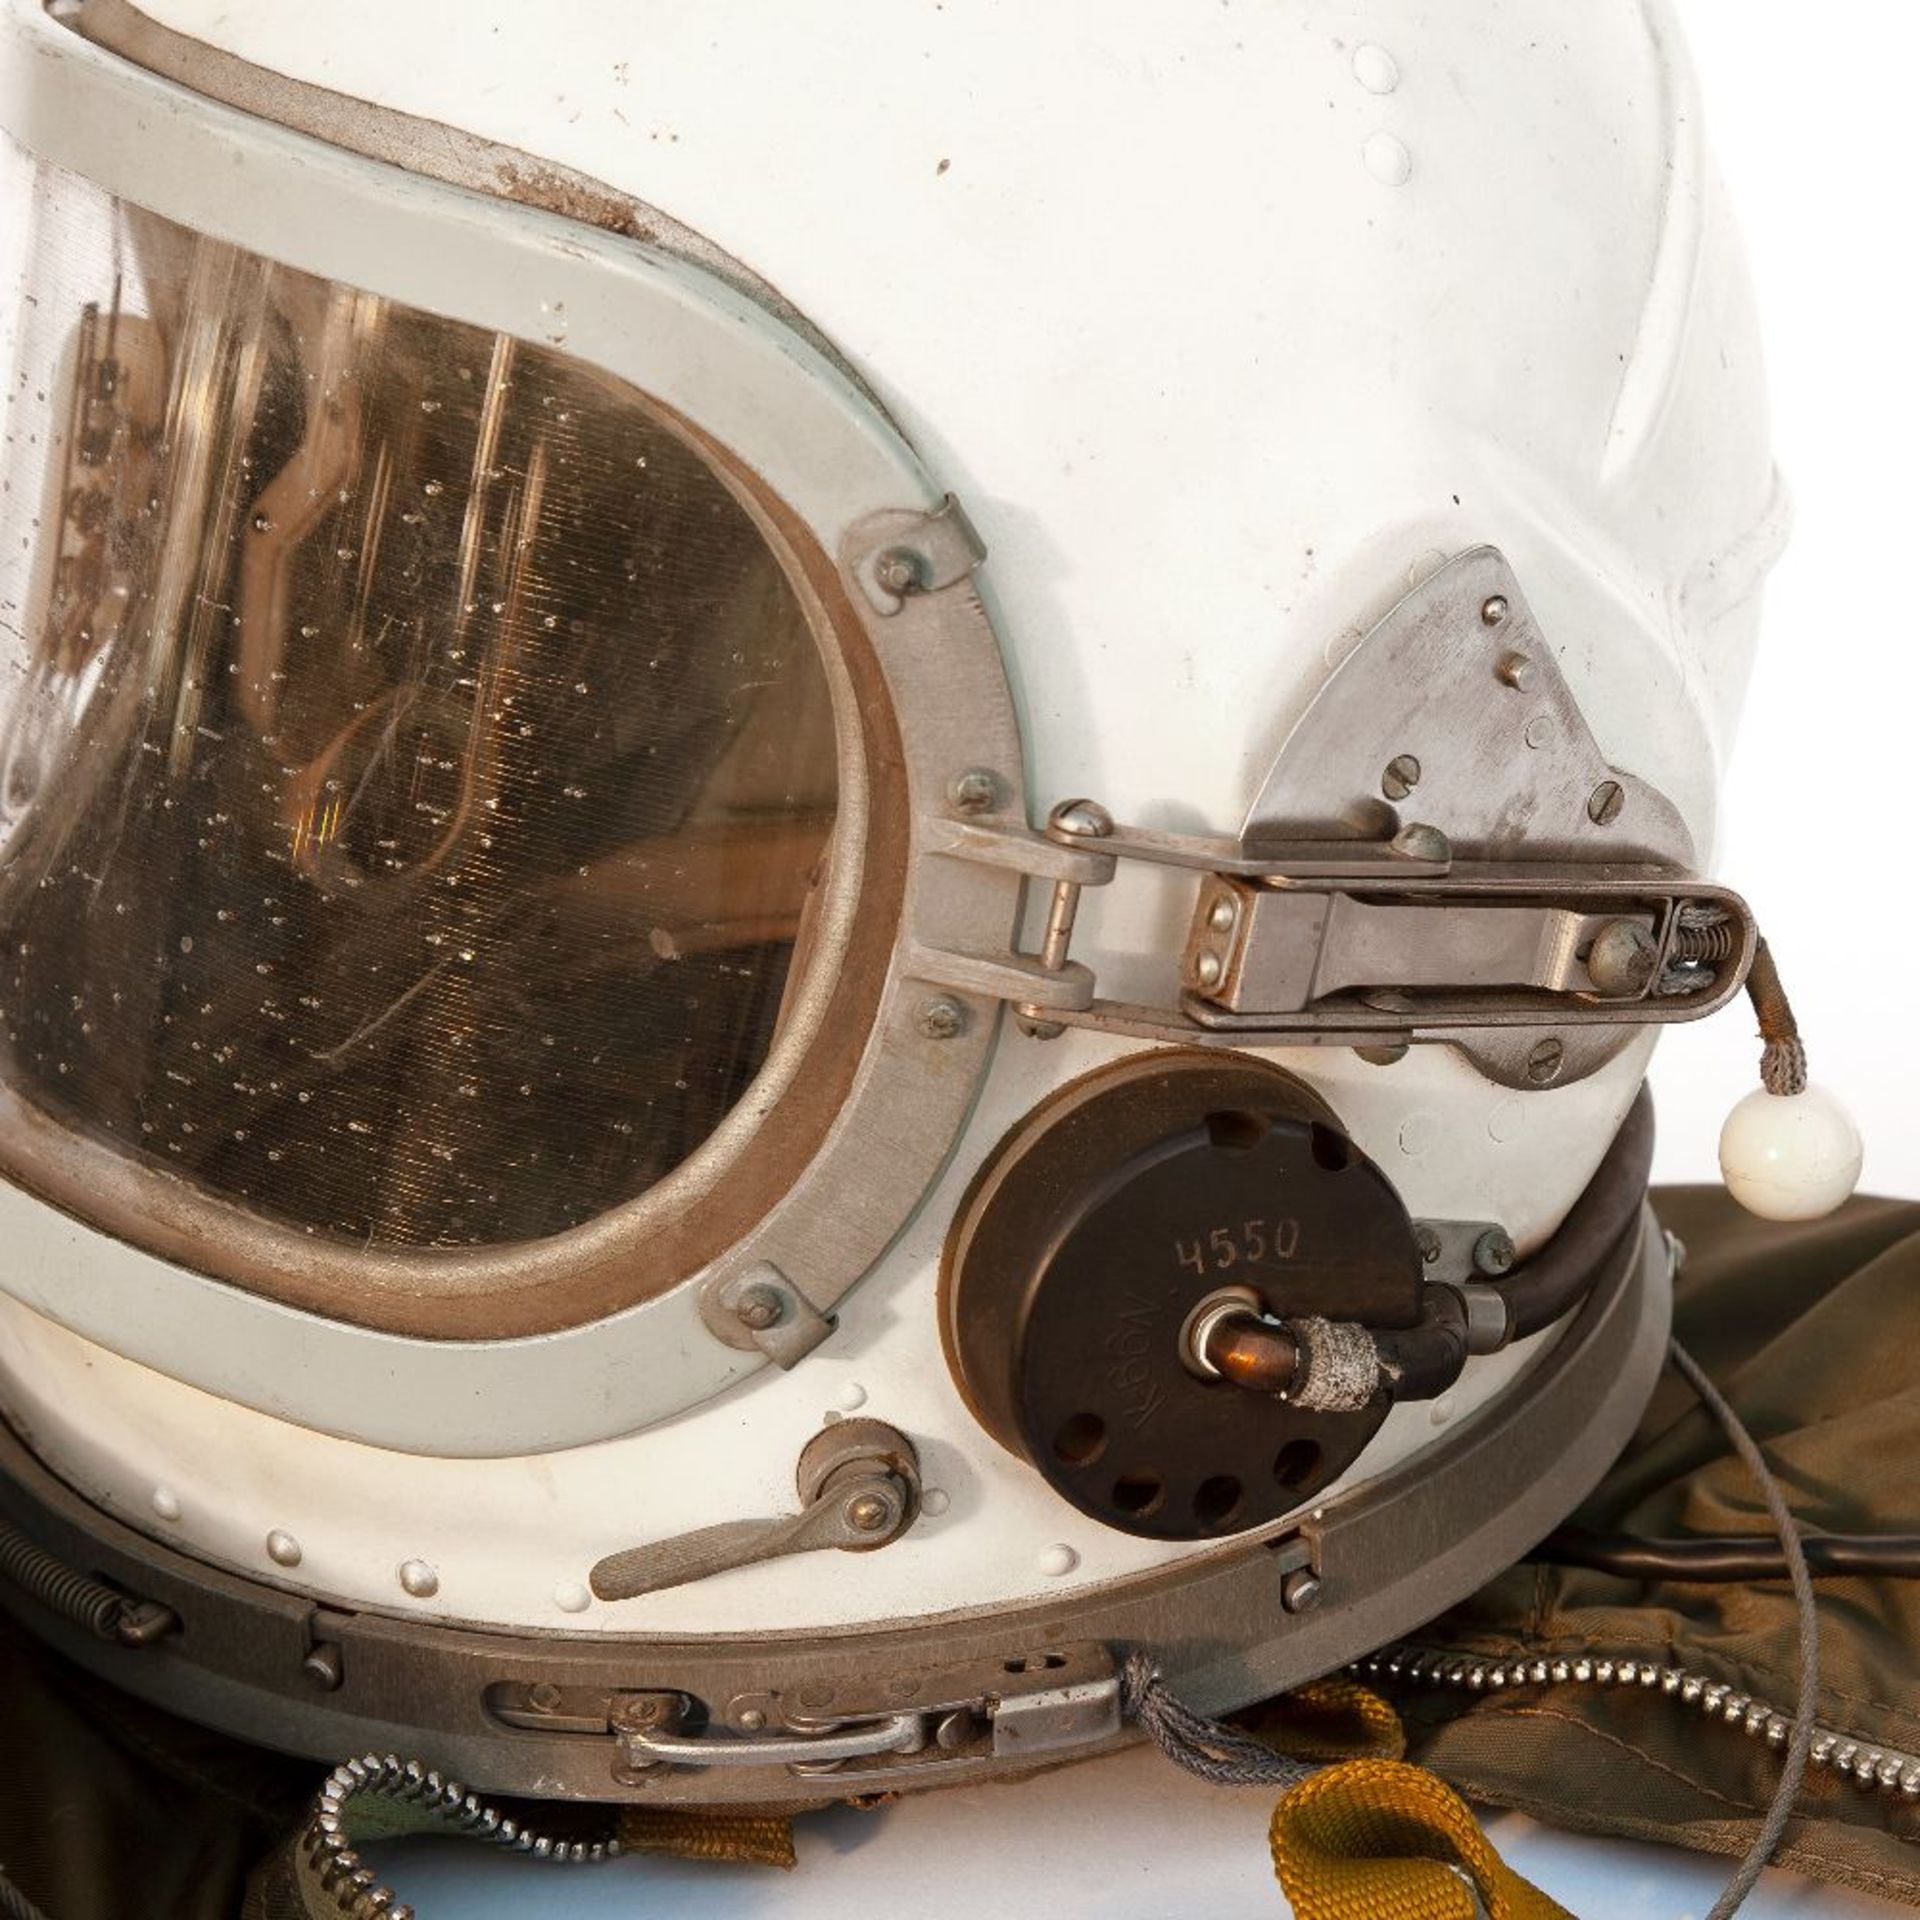 A COLD WAR SOVIET MIG 25 PILOT'S HELMET,c.1960-65, constructed for high altitude flight, also used - Image 4 of 5